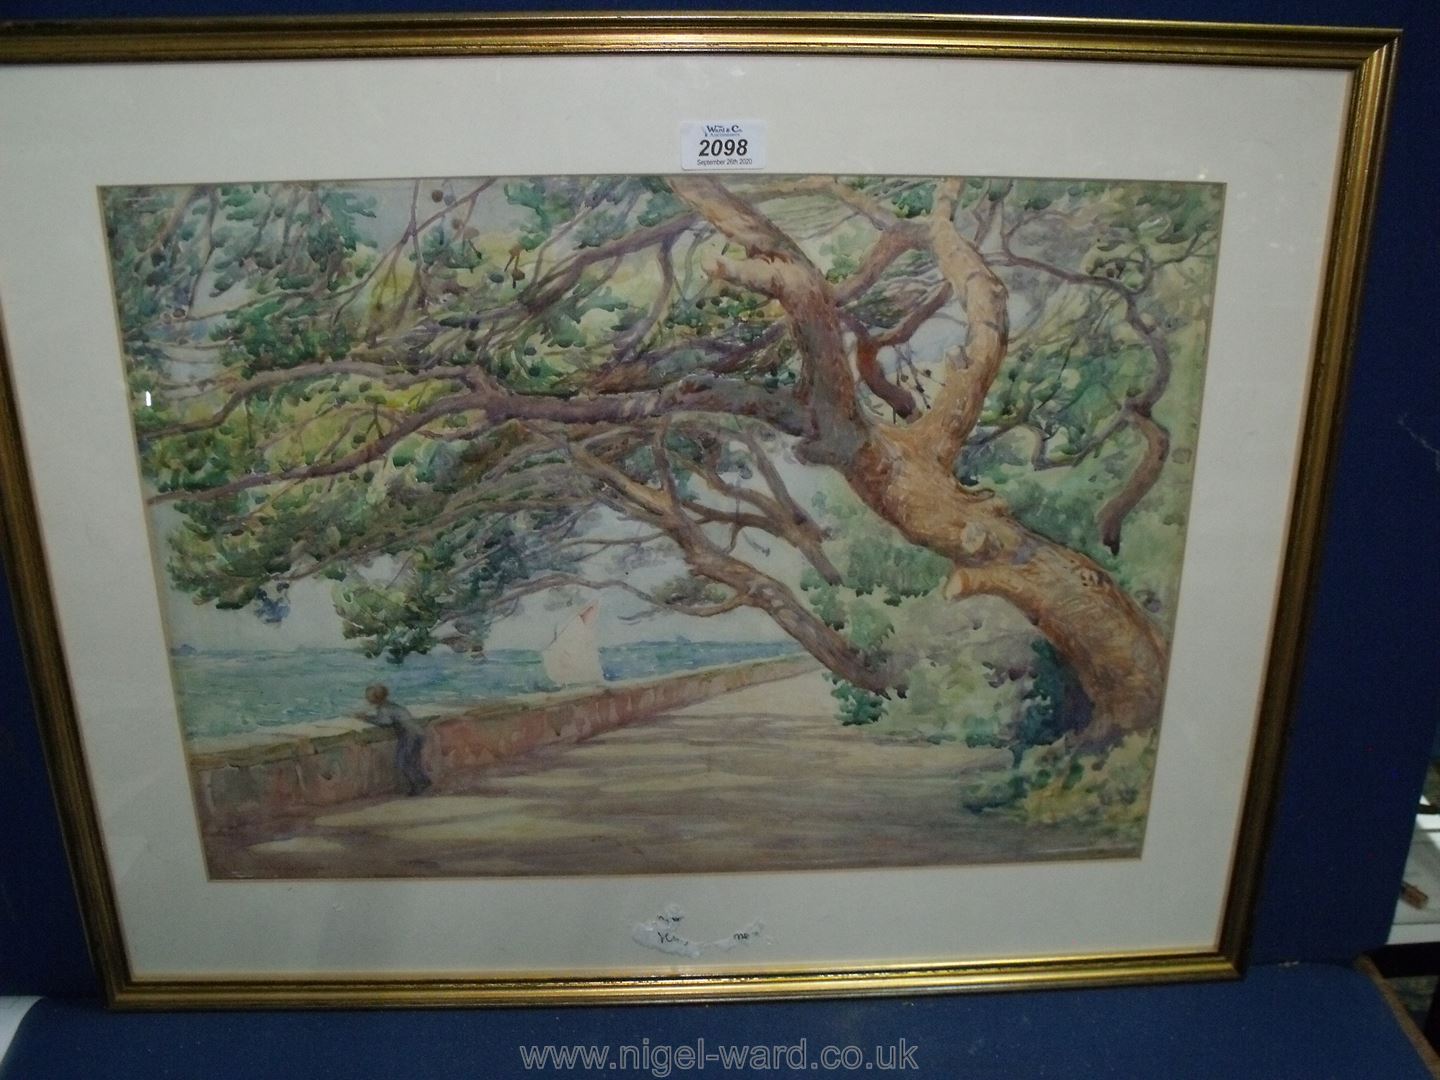 A framed and mounted Watercolour of a figure by a coastal scene, signed lower left L.